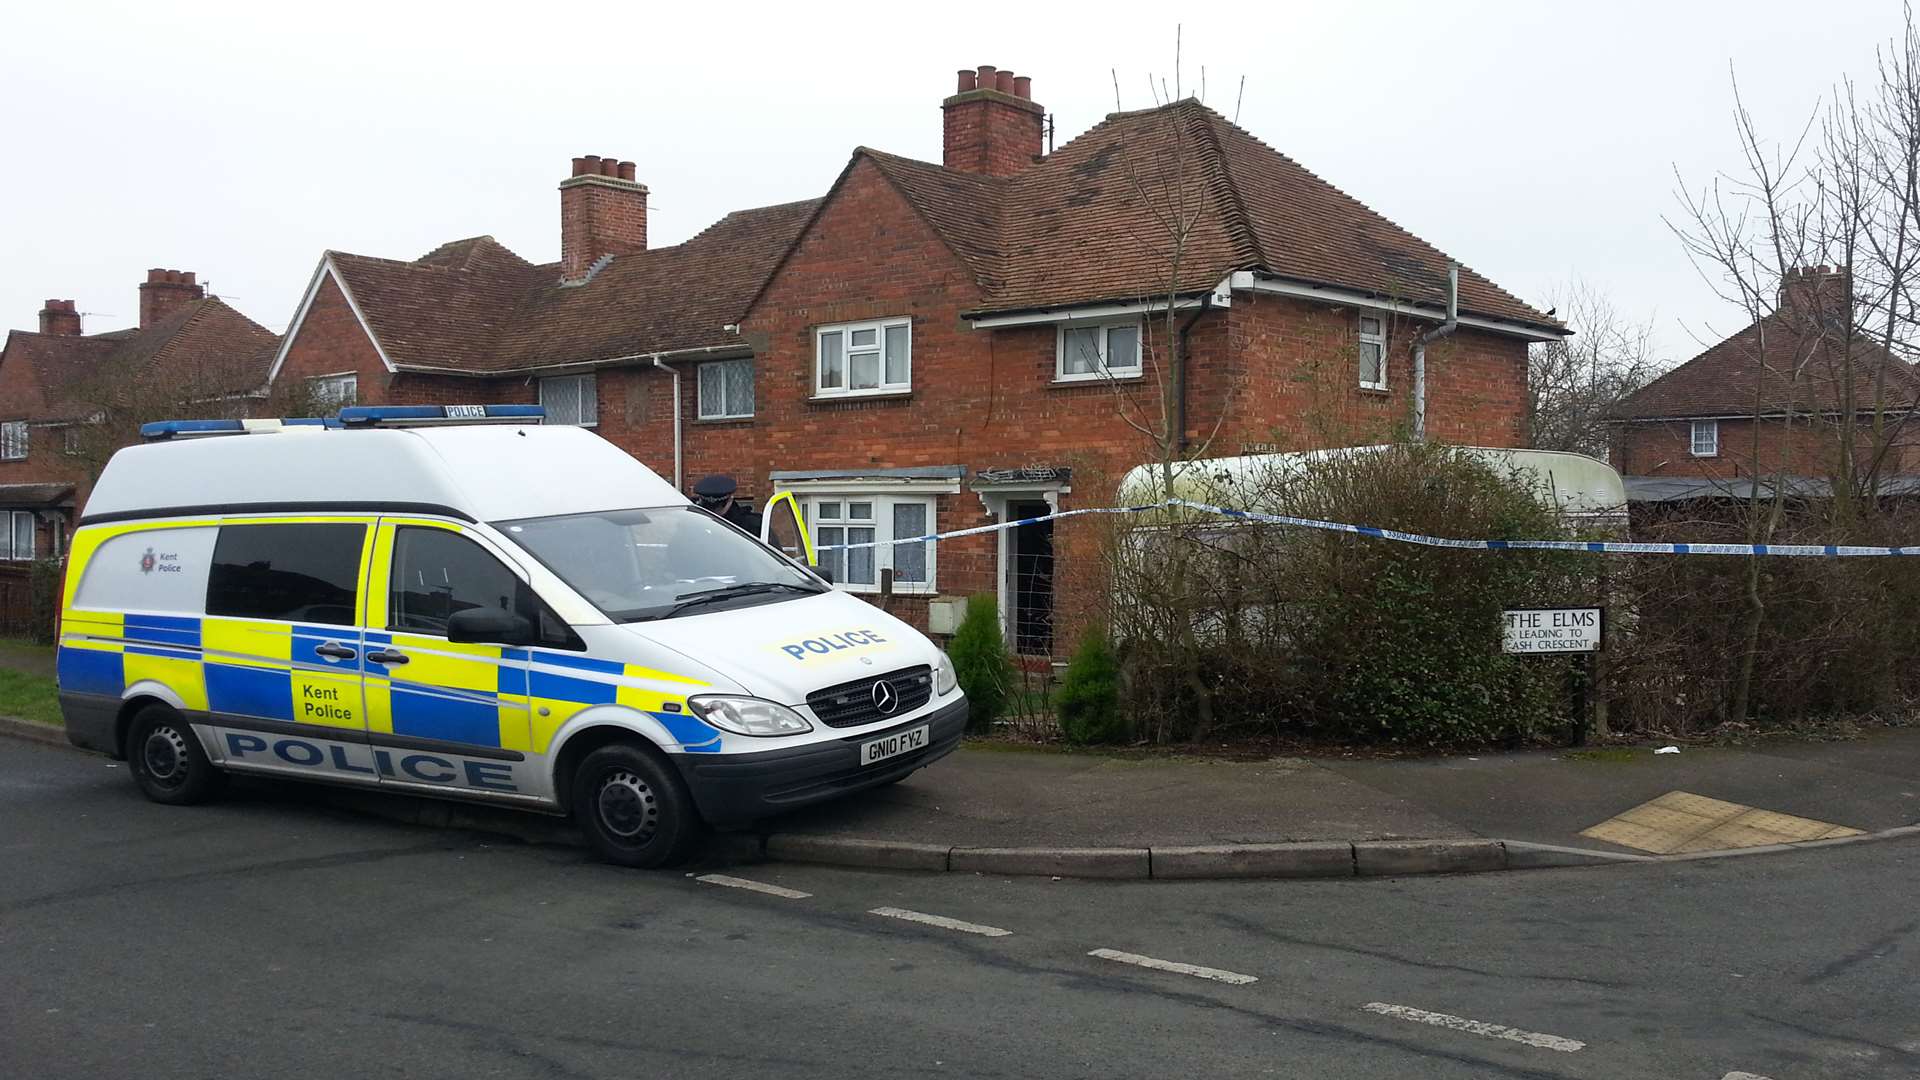 The house taped off in Hersden